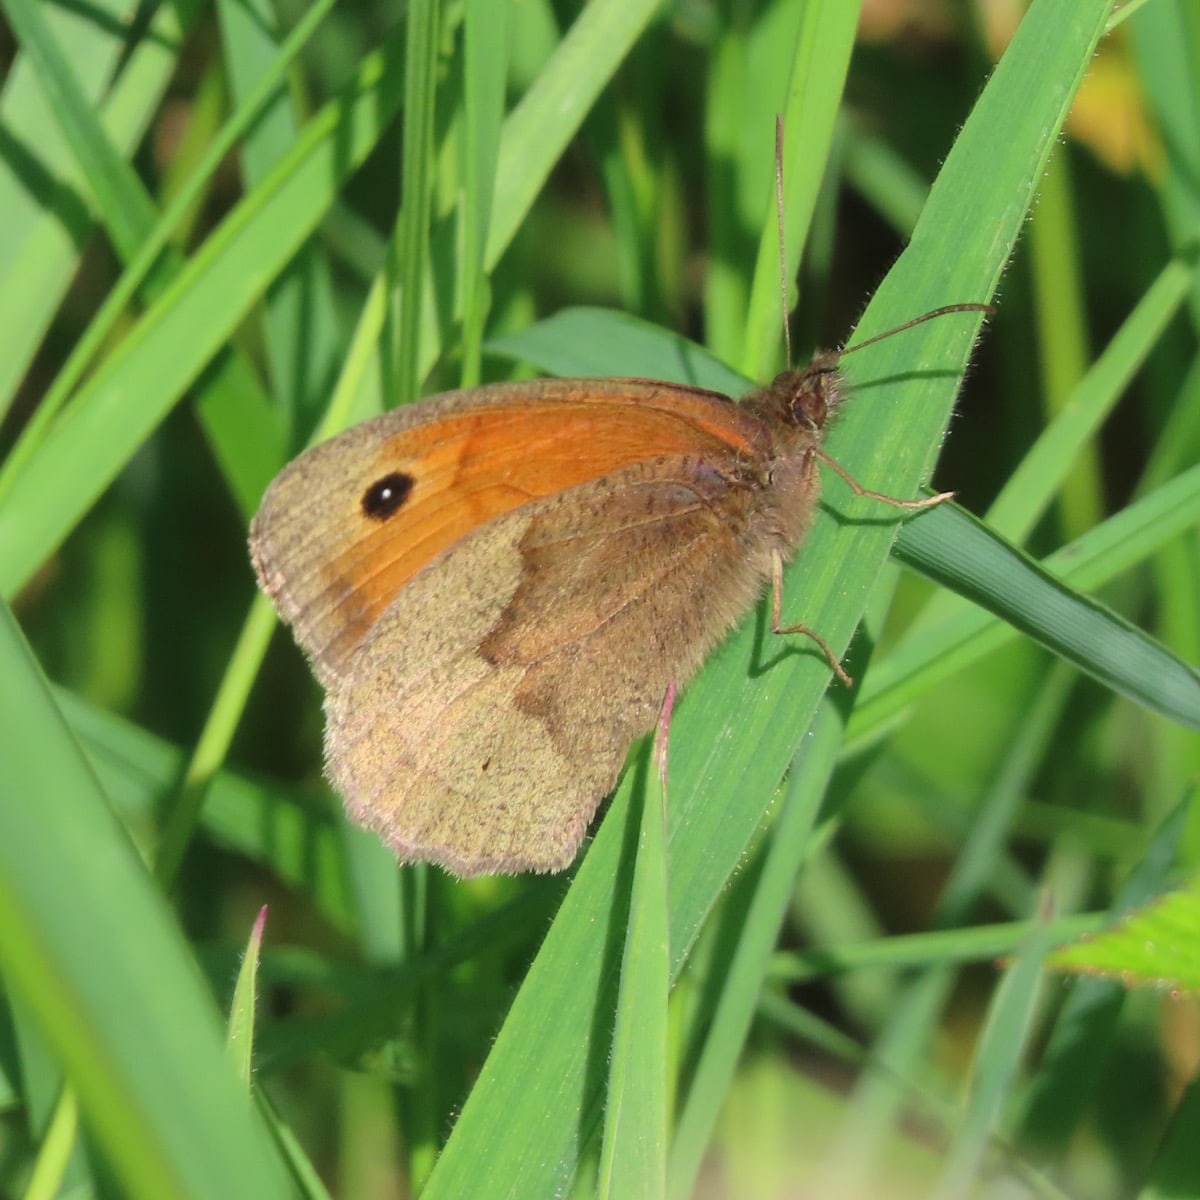 Meadow Brown Butterfly clinging to blade of grass with its wings closed.